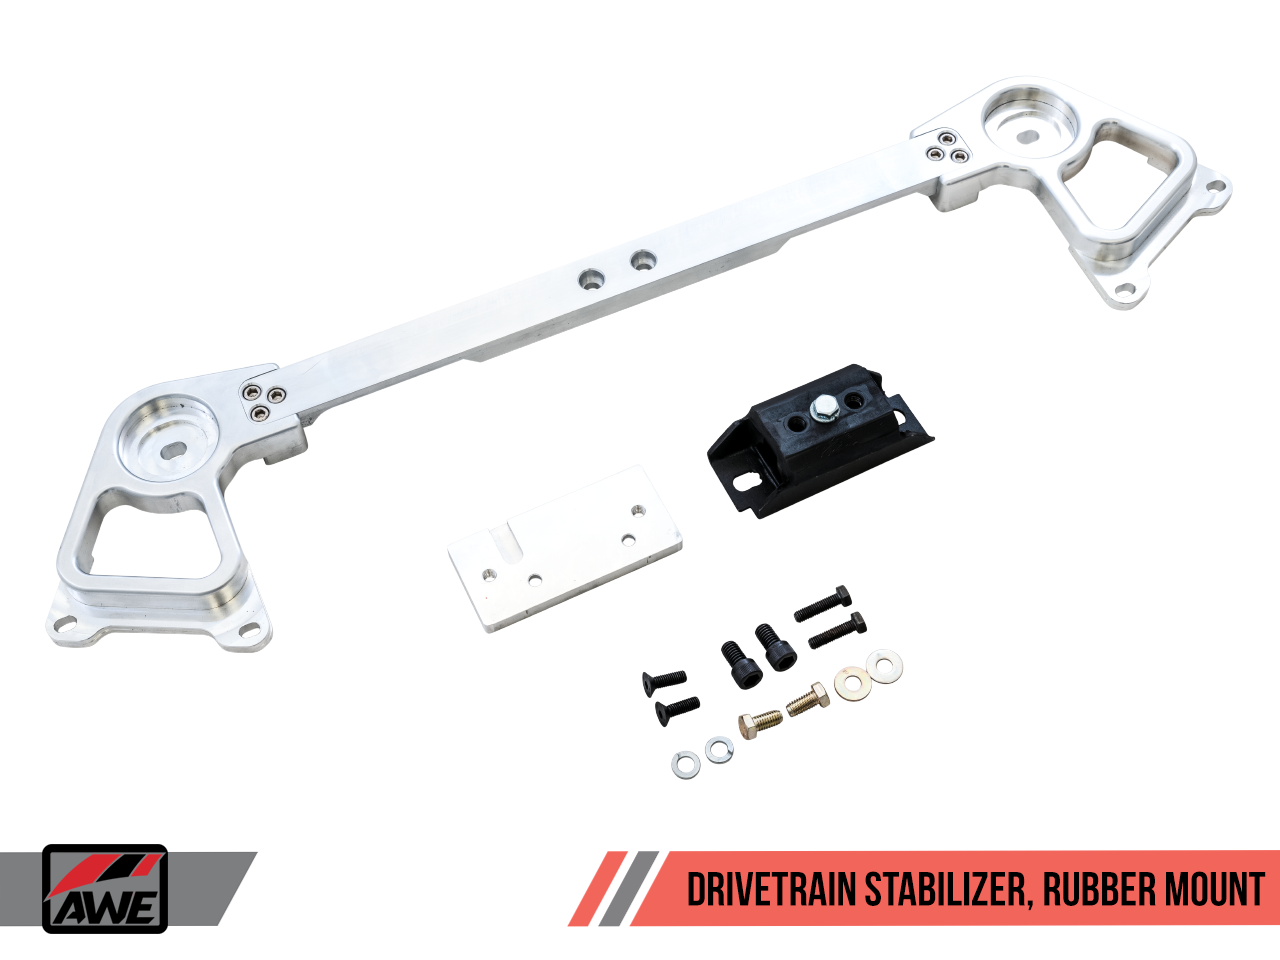 AWE Drive Train Stabilizer (DTS) for allroad